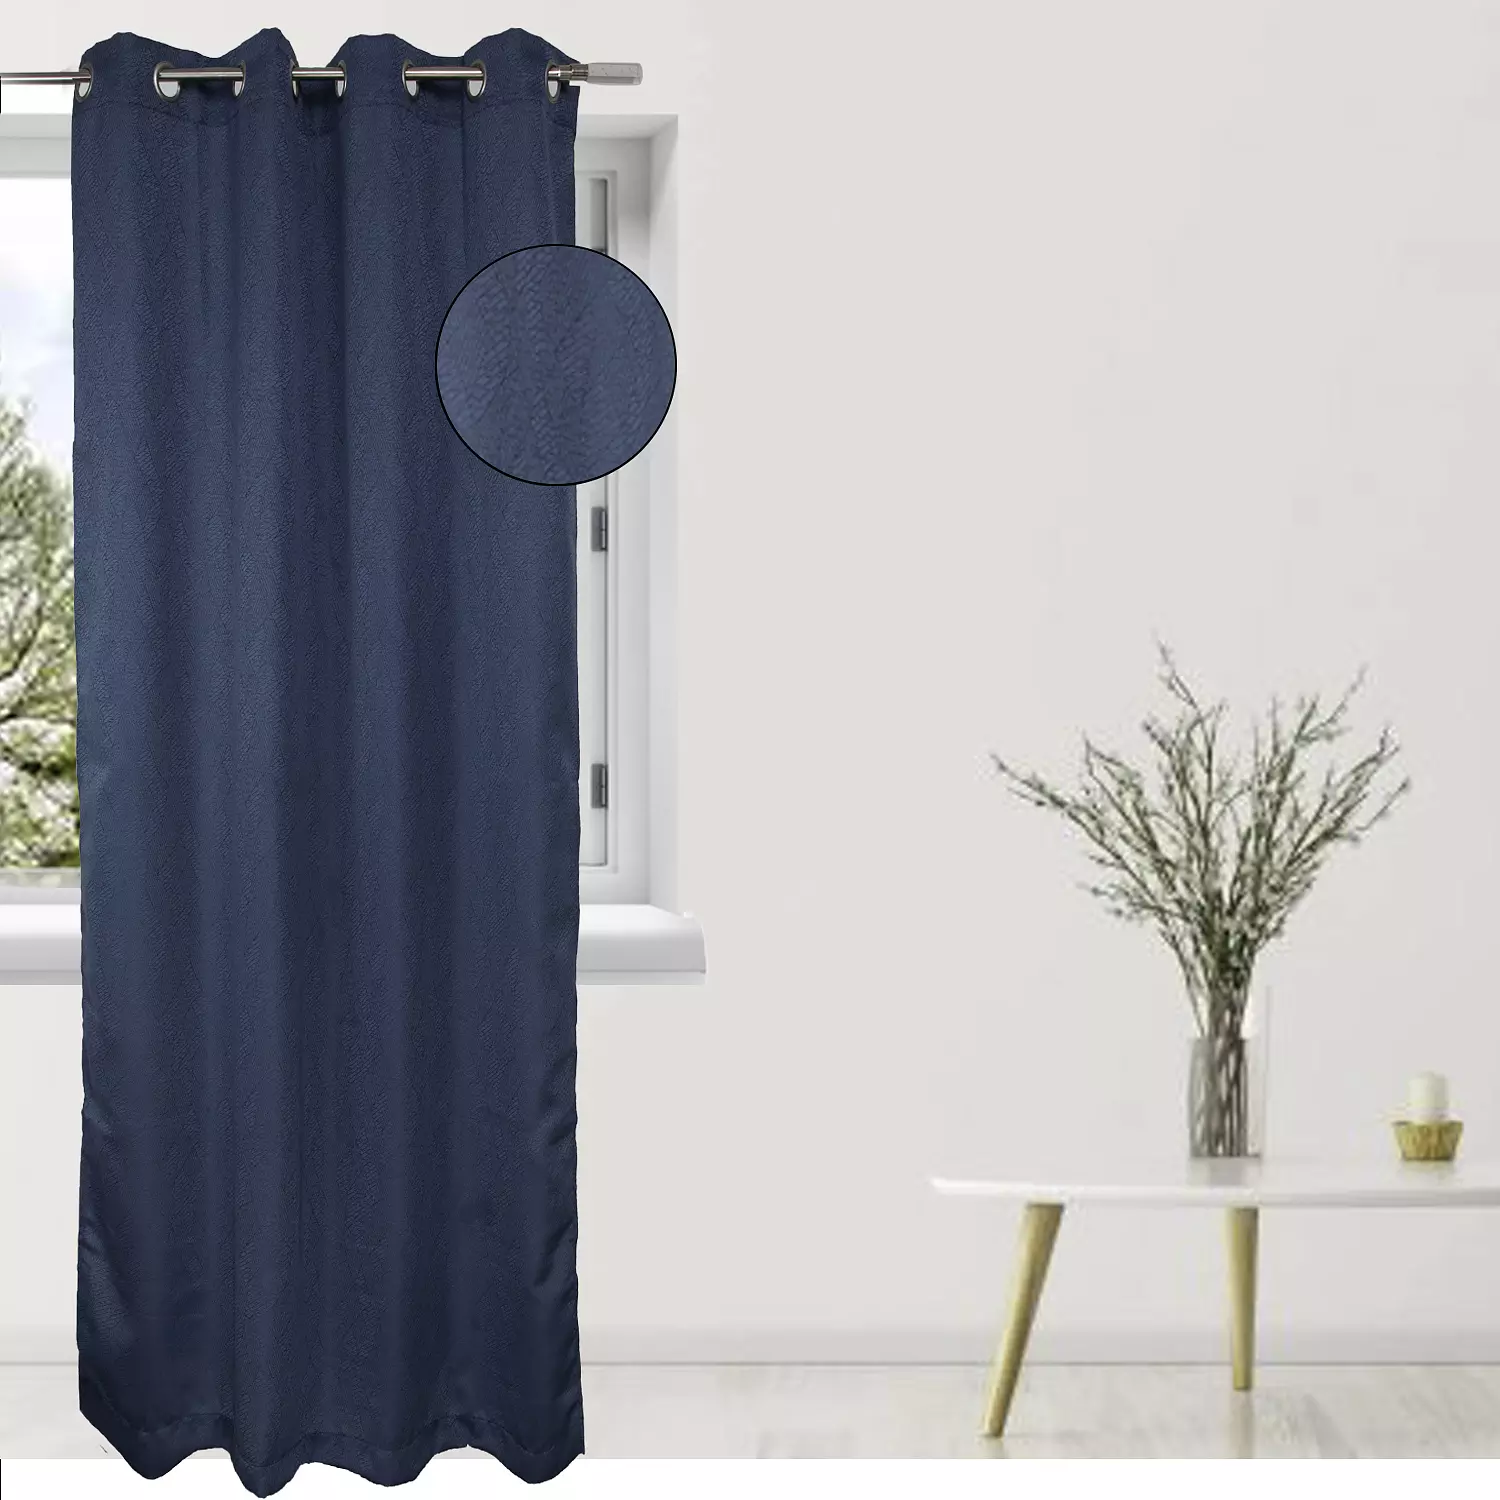 Vania, jacquard curtain with metal grommets, 54"x84", blue